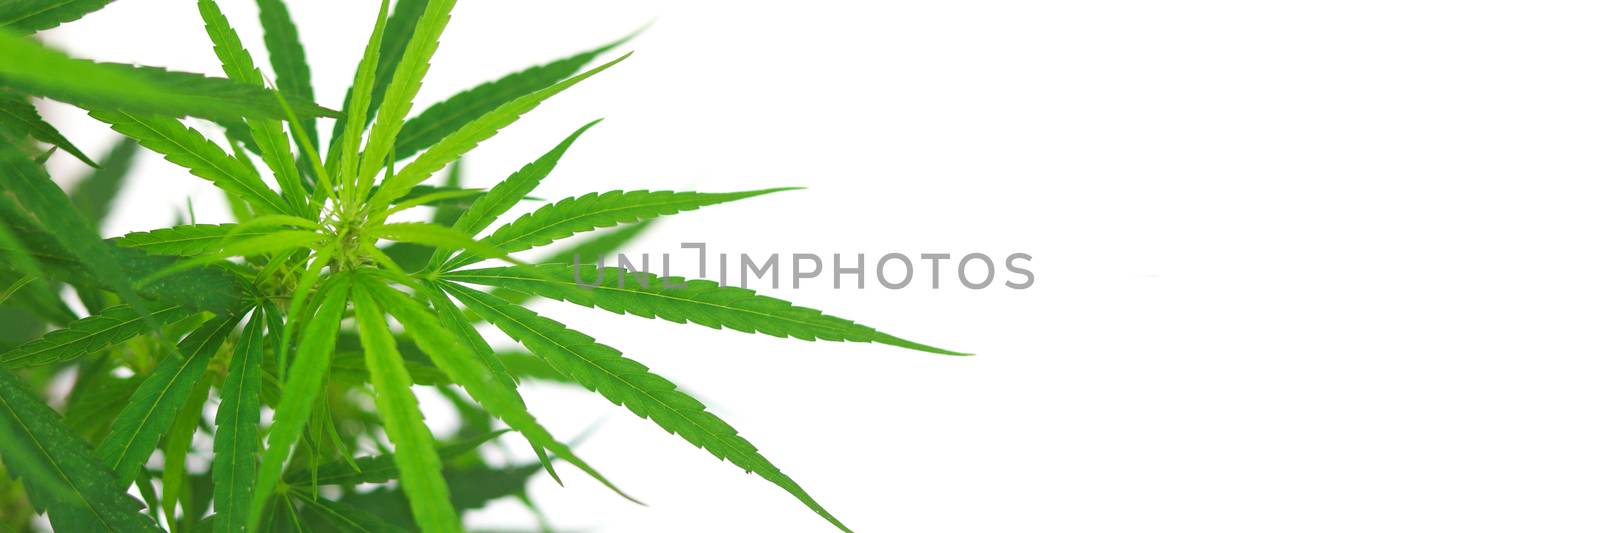 Green hemp leaf with copy space on the right. Young shoots of cannabis on white background.